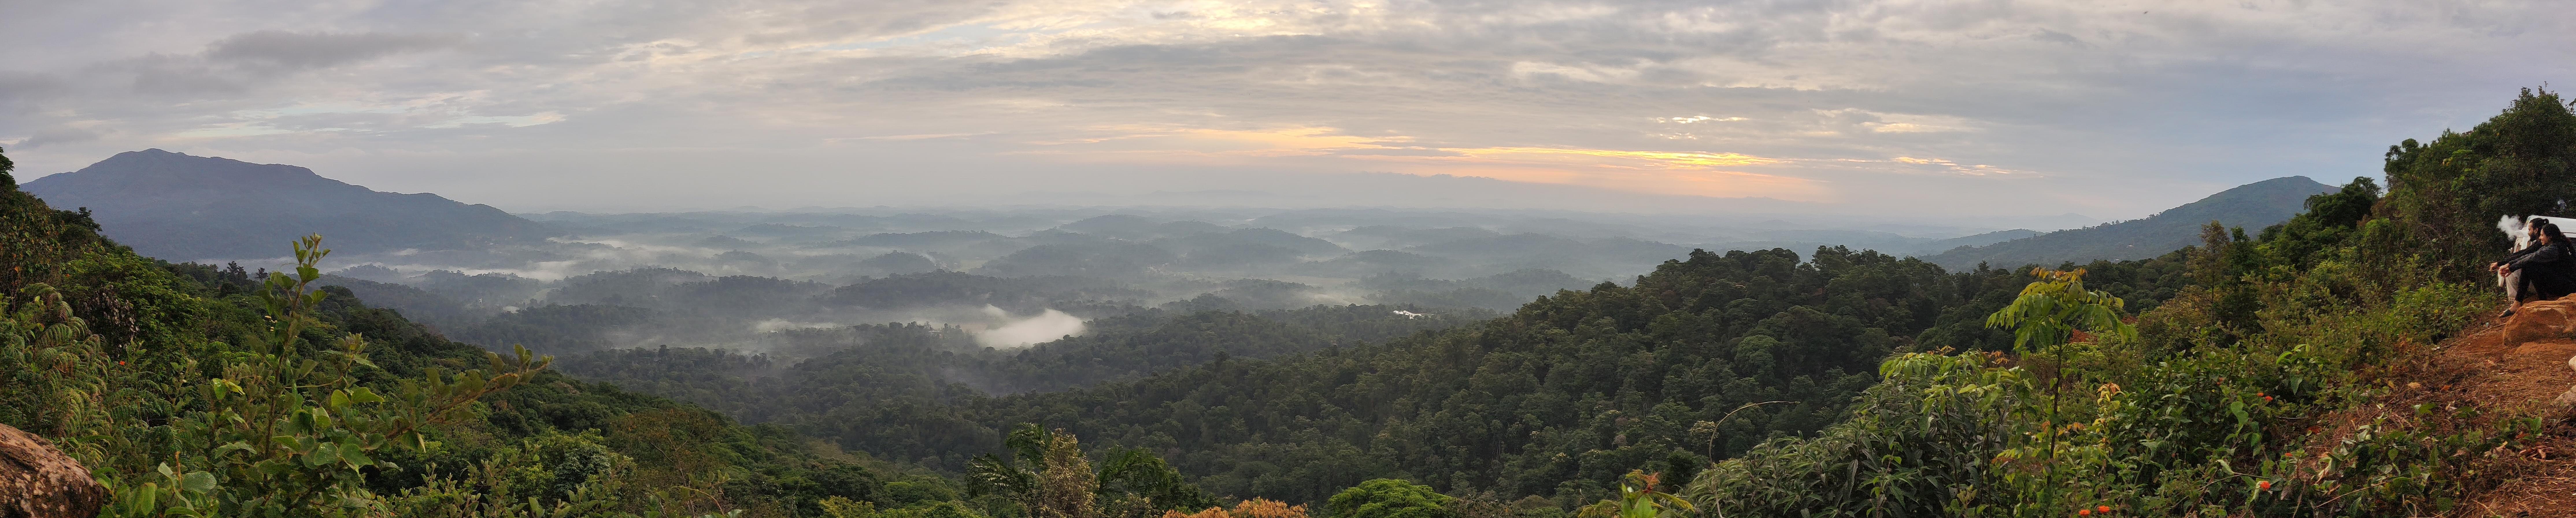 Tadiandamol Peak, Coorg: How To Reach, Best Time & Tips